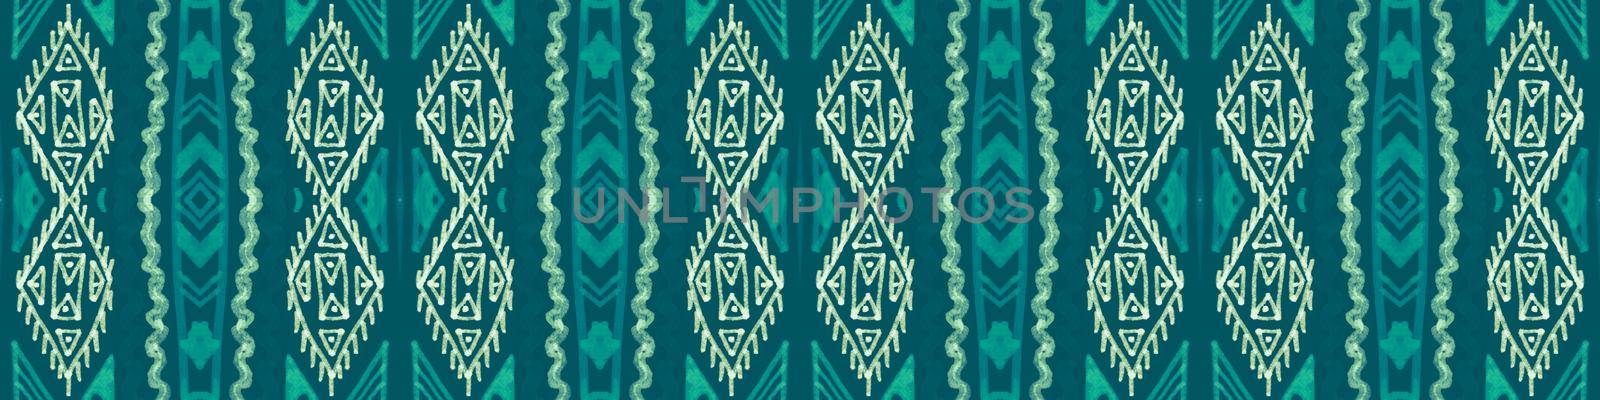 Vintage tribal ribbon. Seamless ethnic background. Art aztec pattern. Peruvian american ornament. Abstract tribal ribbon. Traditional navajo design for fabric. Geometric african print.